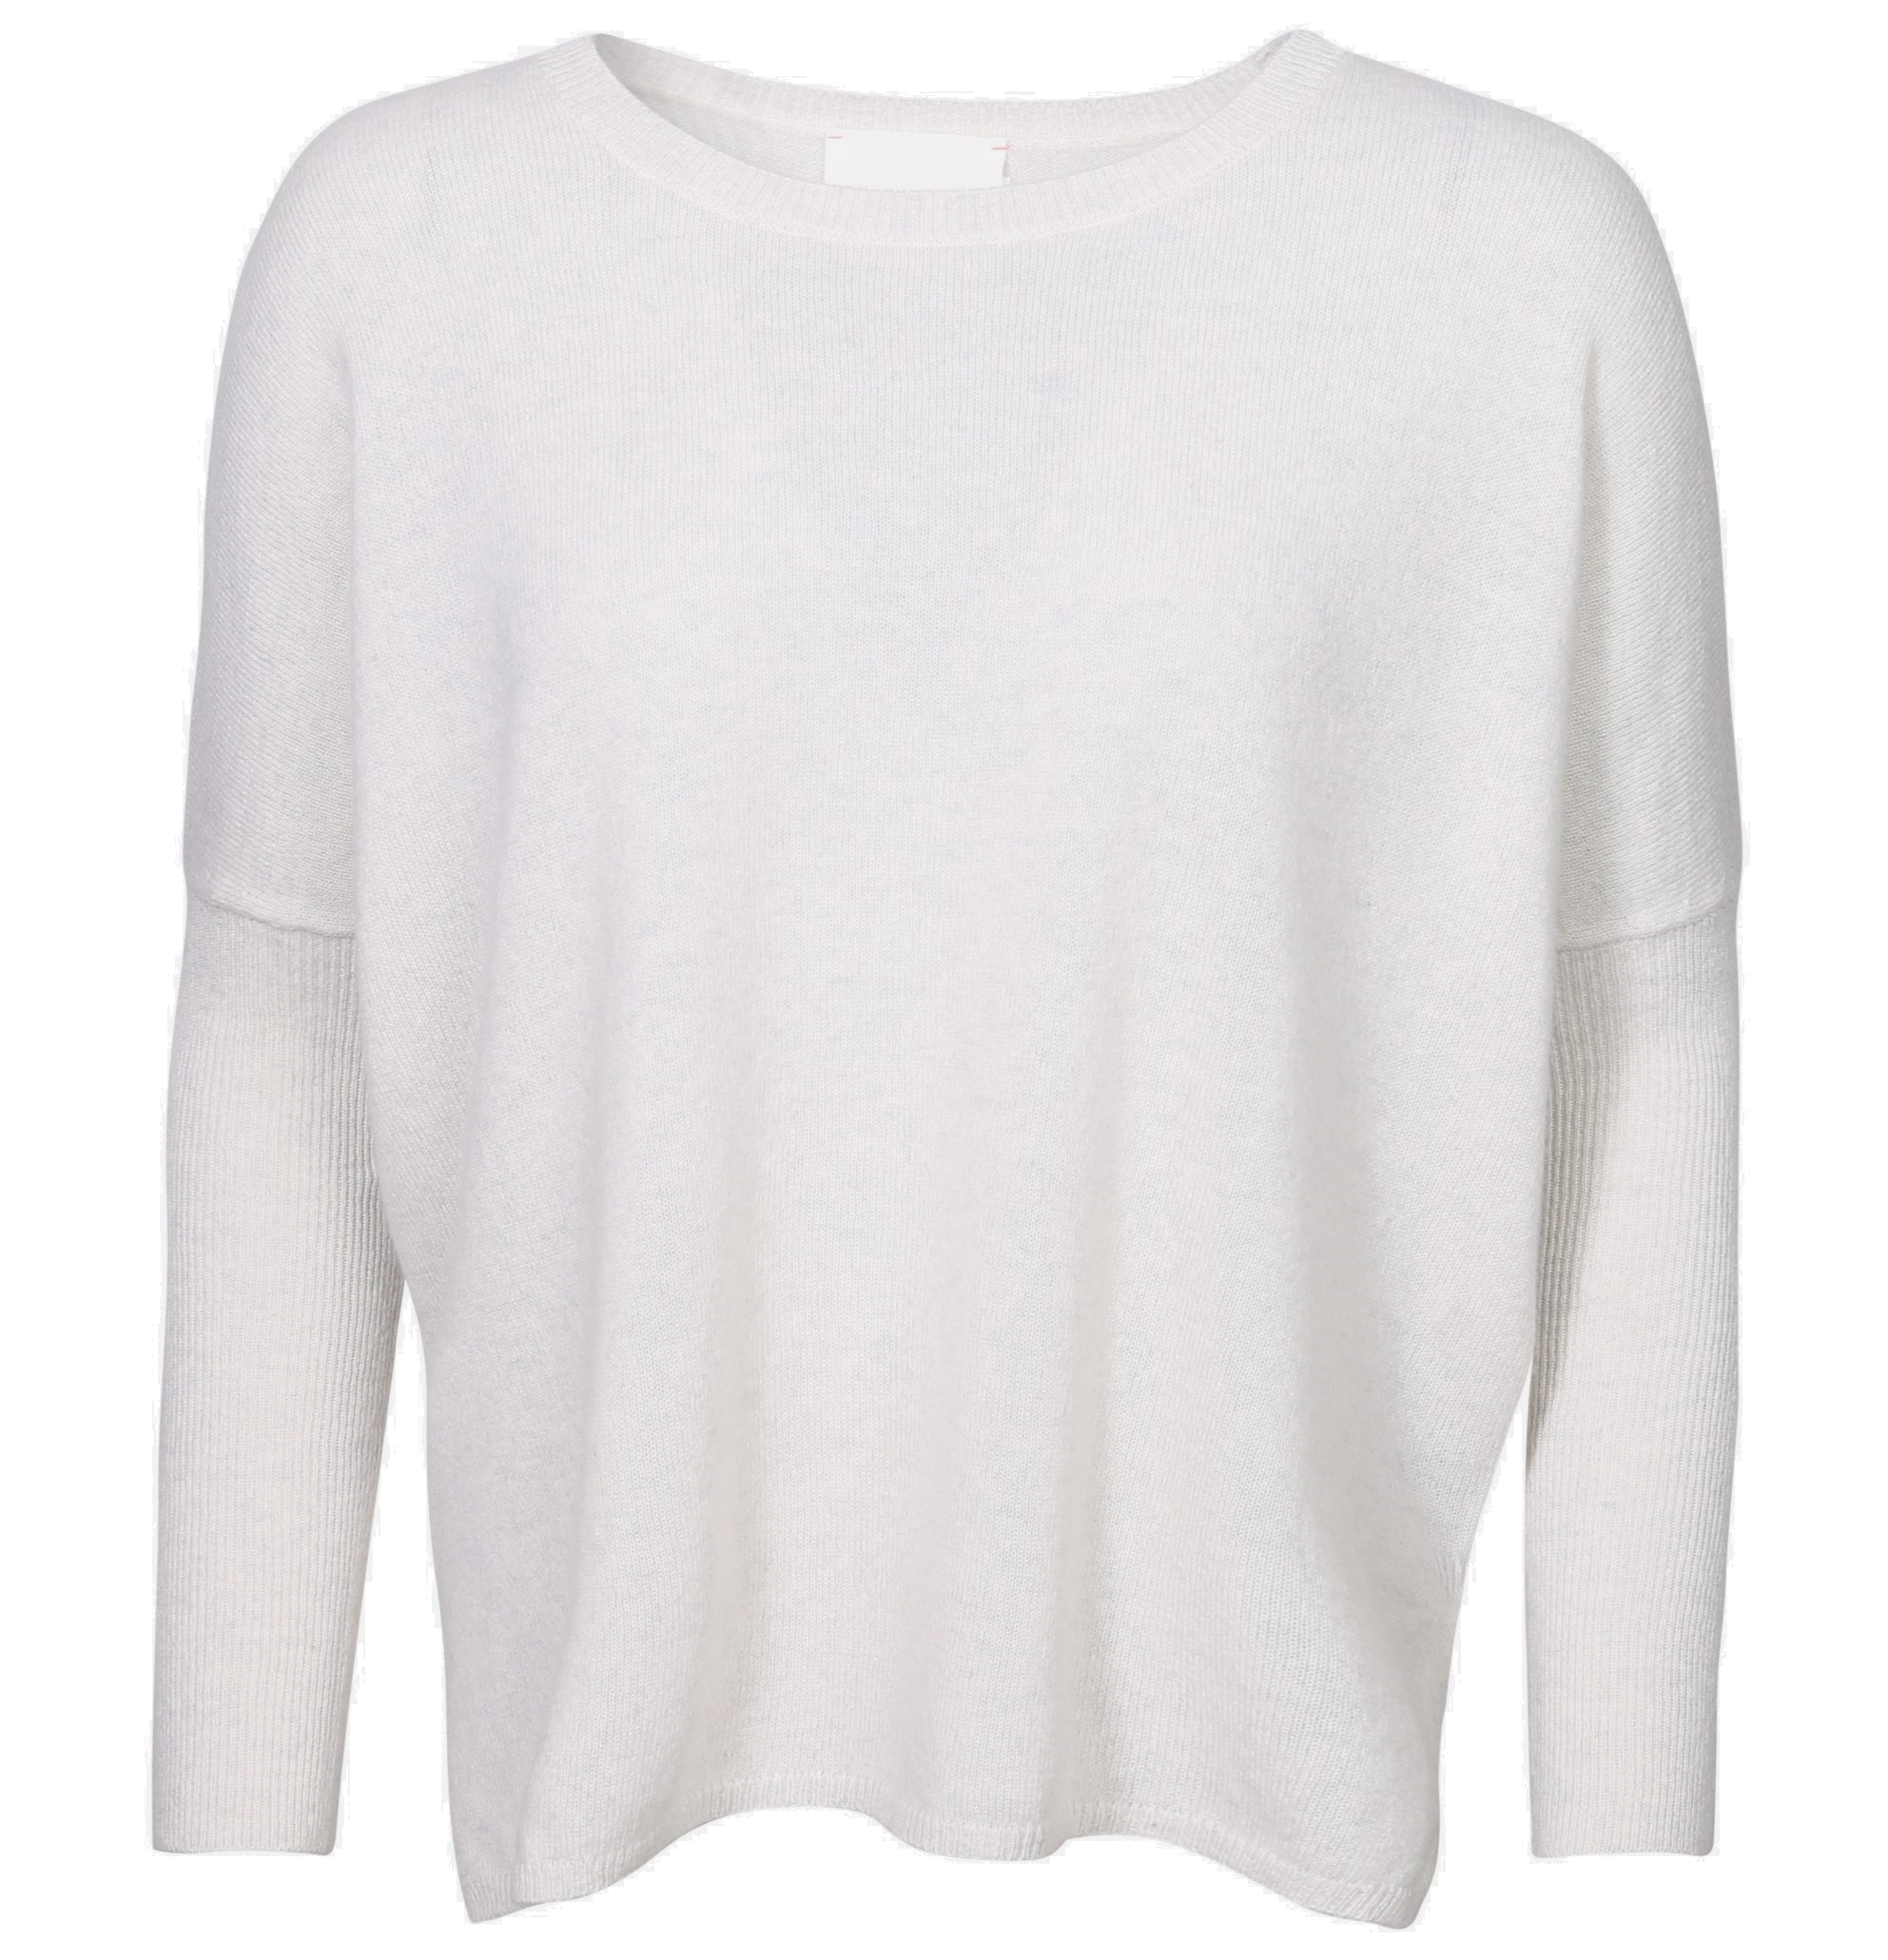 ABSOLUT CASHMERE Poncho Sweater Astrid in Light Grey Melange S